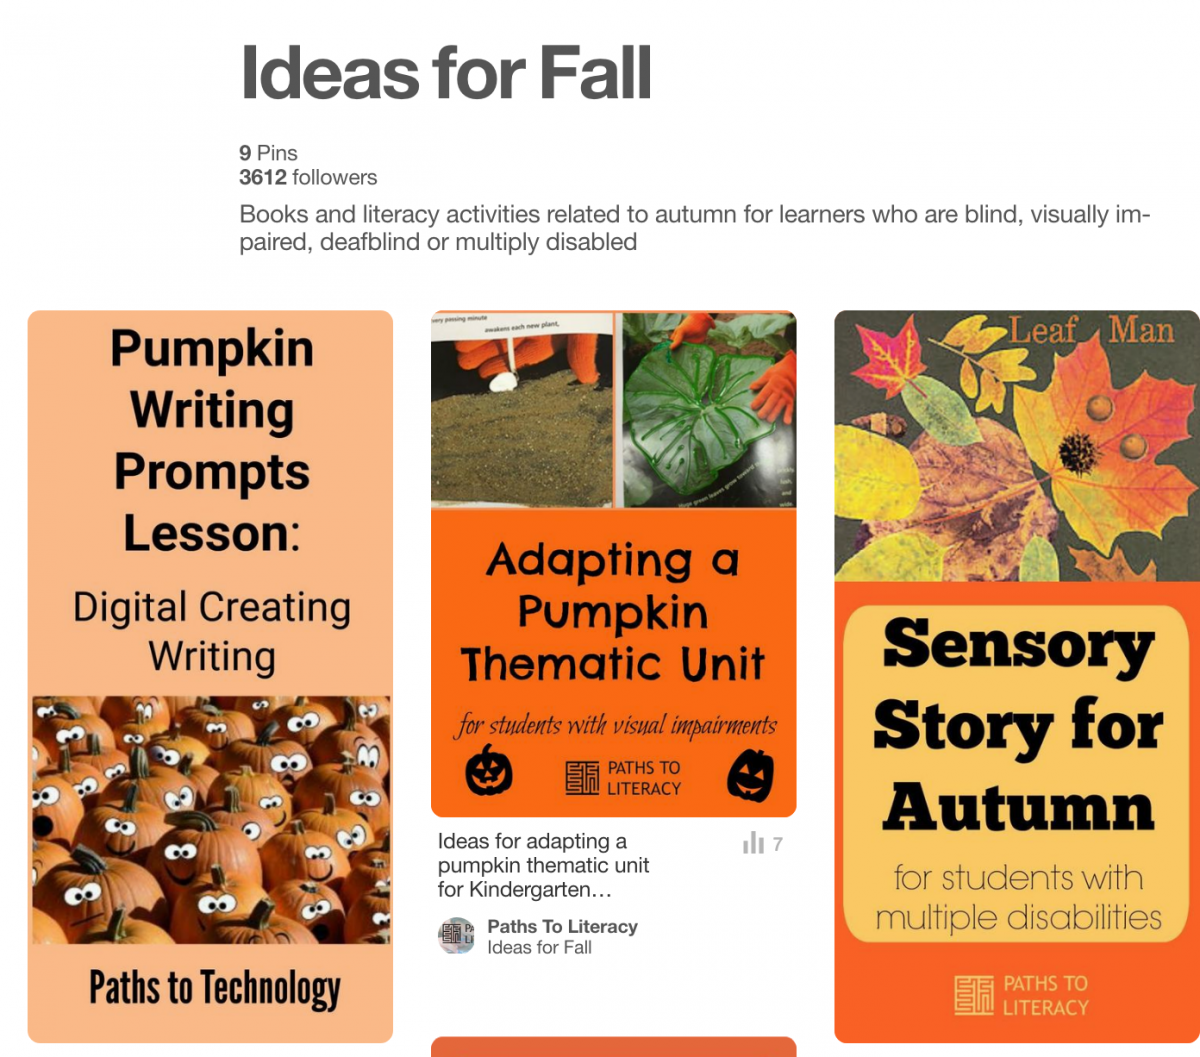 Pinterest board with Ideas for Fall